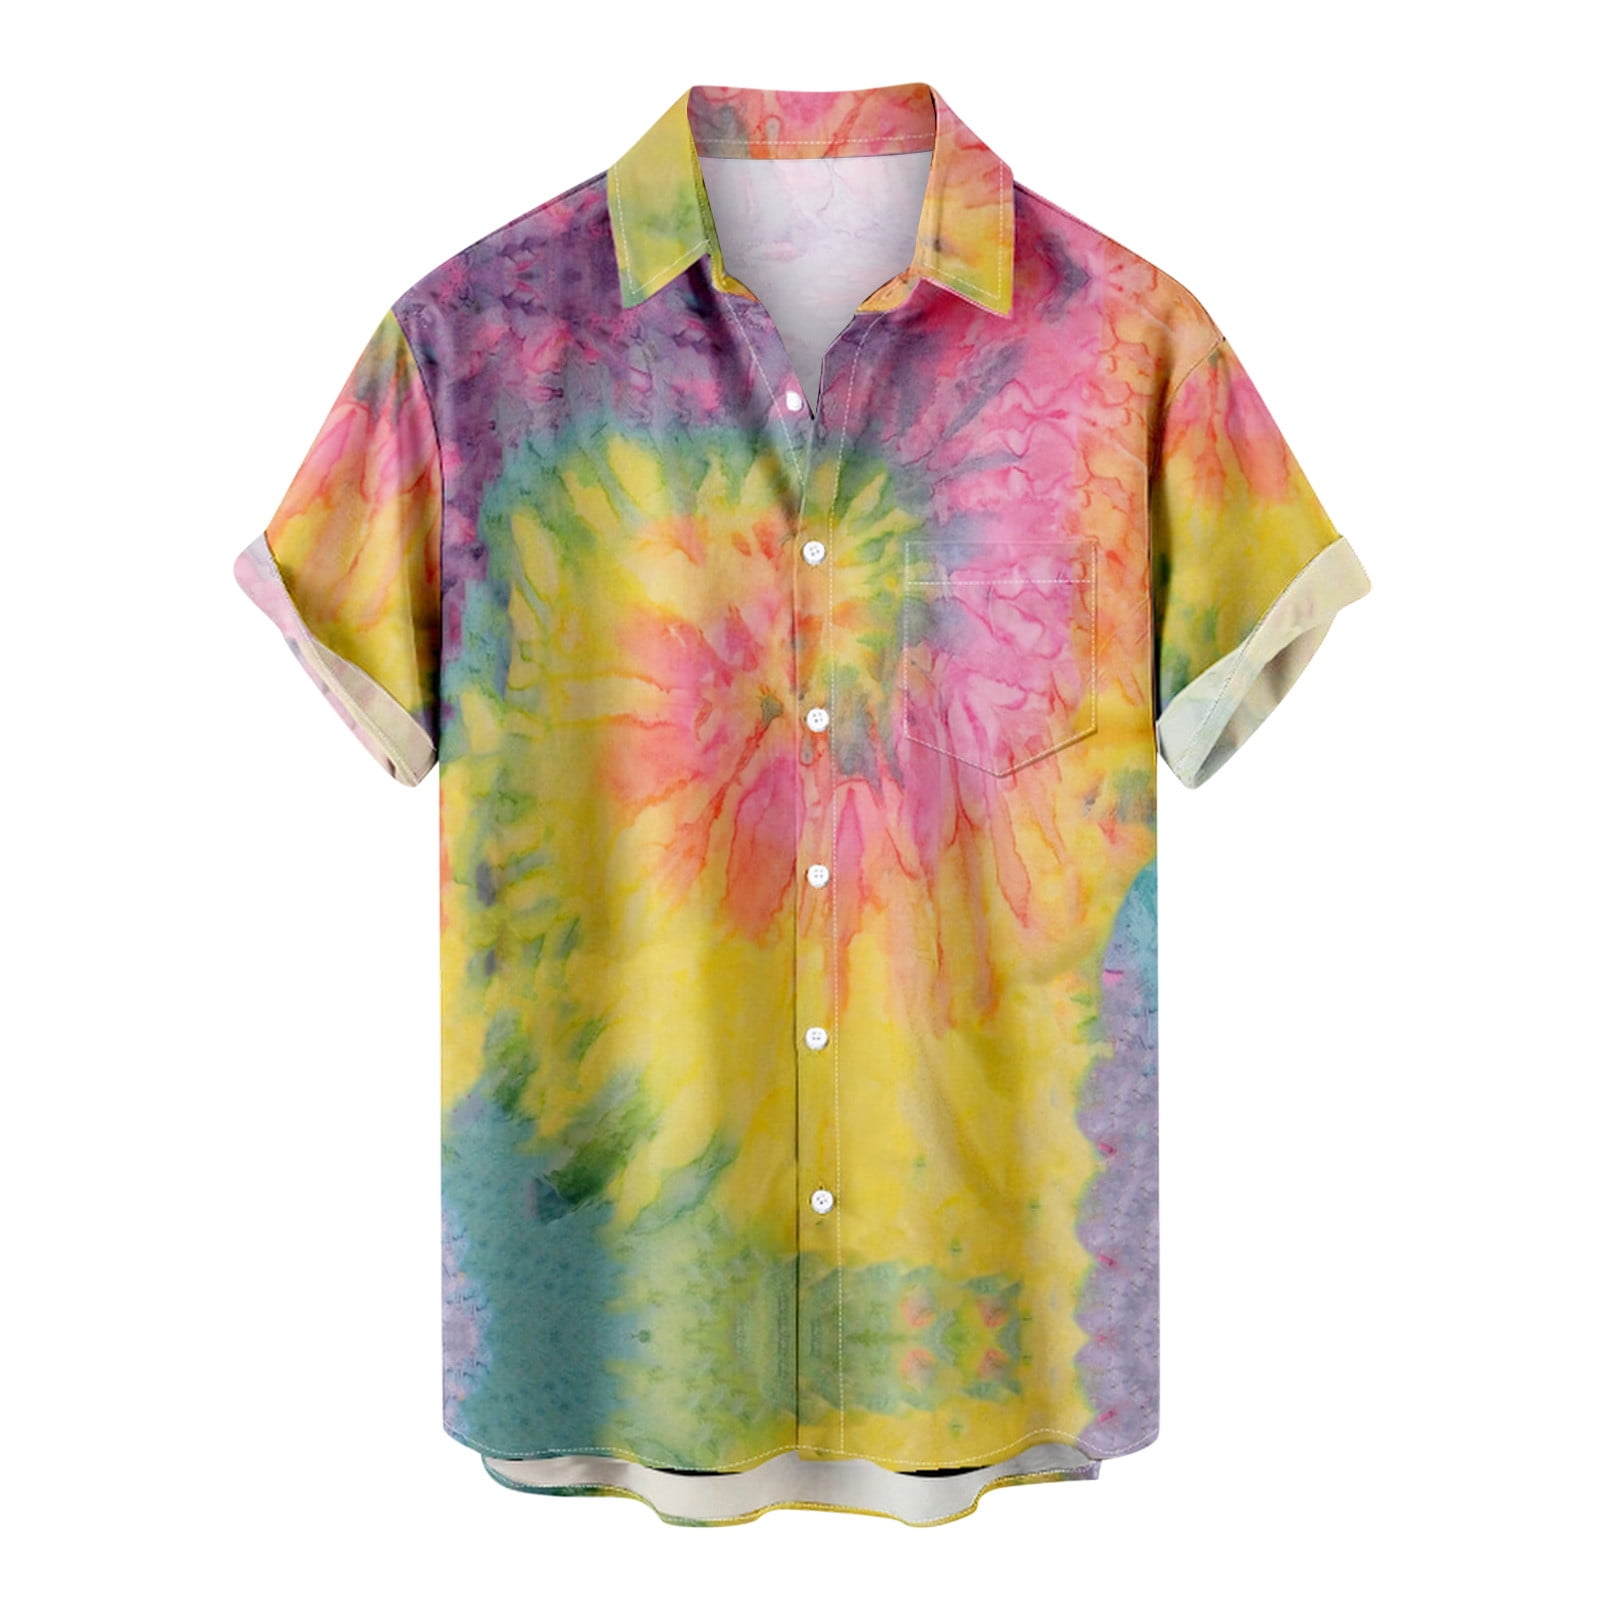 VSSSJ Casual Shirts for Men Slim Fit Summer Tie-Dye Print Short Sleeve  Button Down Collared Pocket Tee Top Comfy Quick Dry Beach Shirt Blouse  Yellow